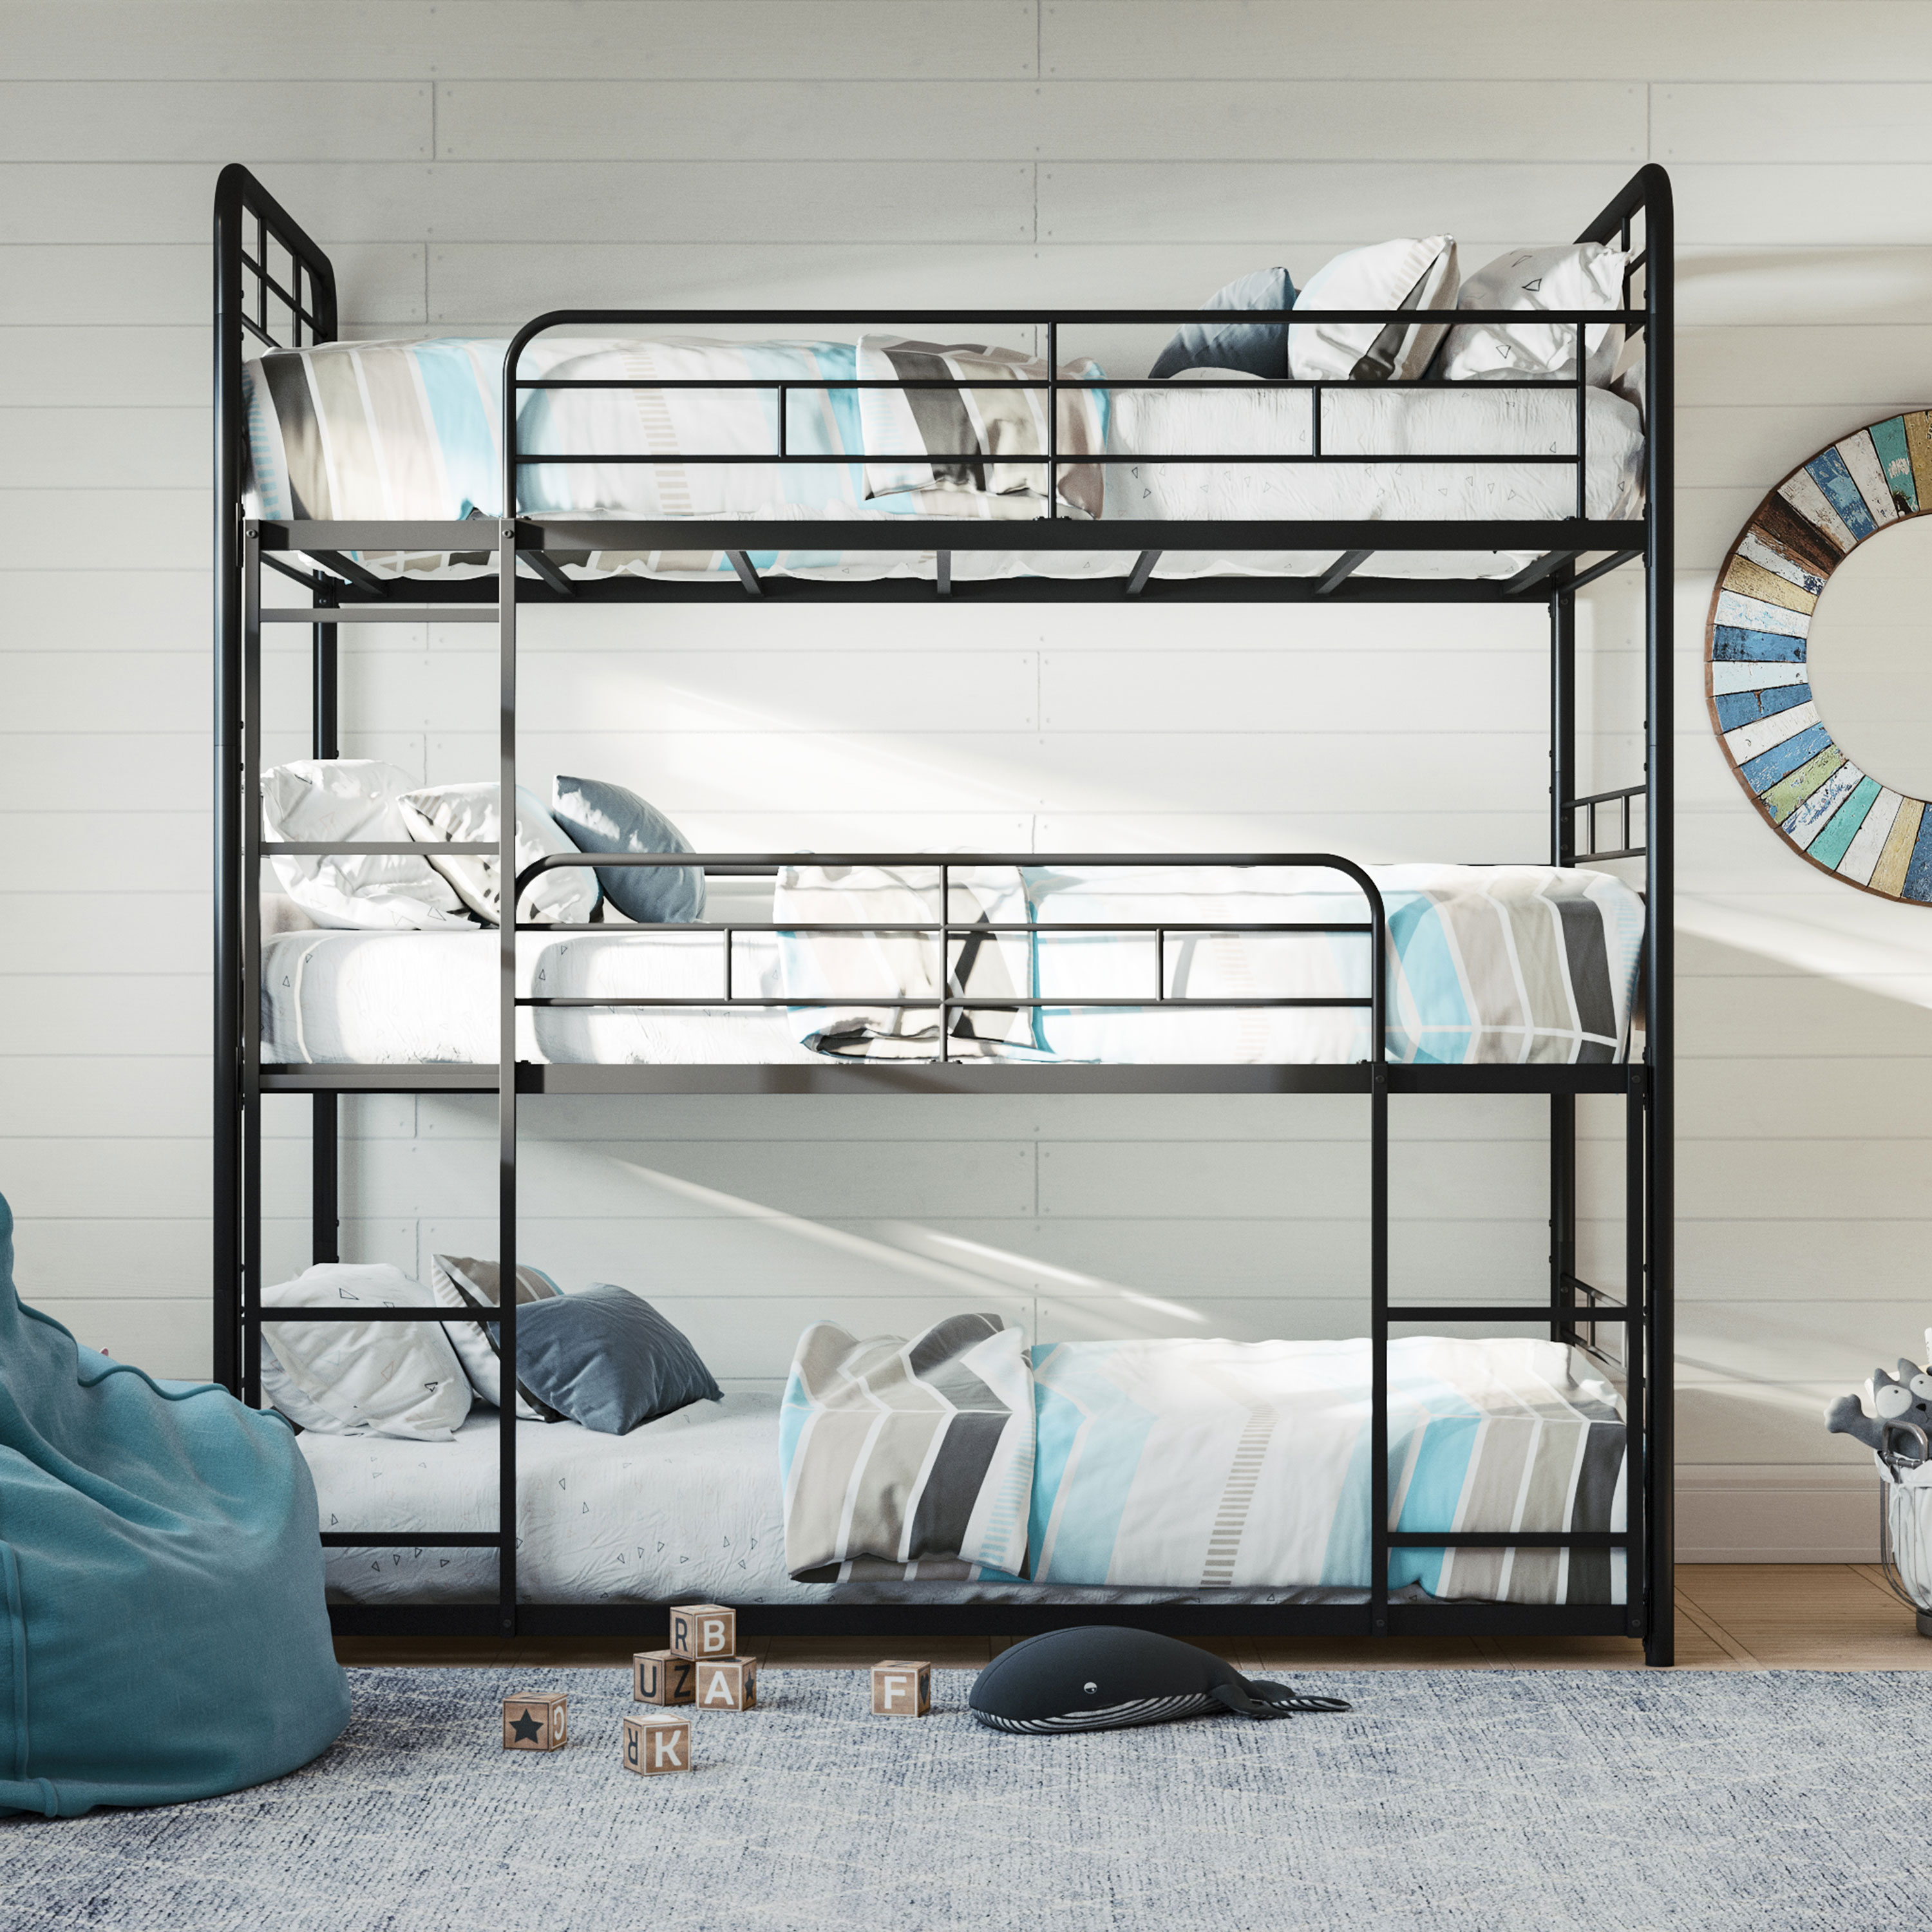 Better Homes & Gardens Anniston Convertible Black Metal Triple Twin Bunk Bed, Gray Wood Accents - image 21 of 26